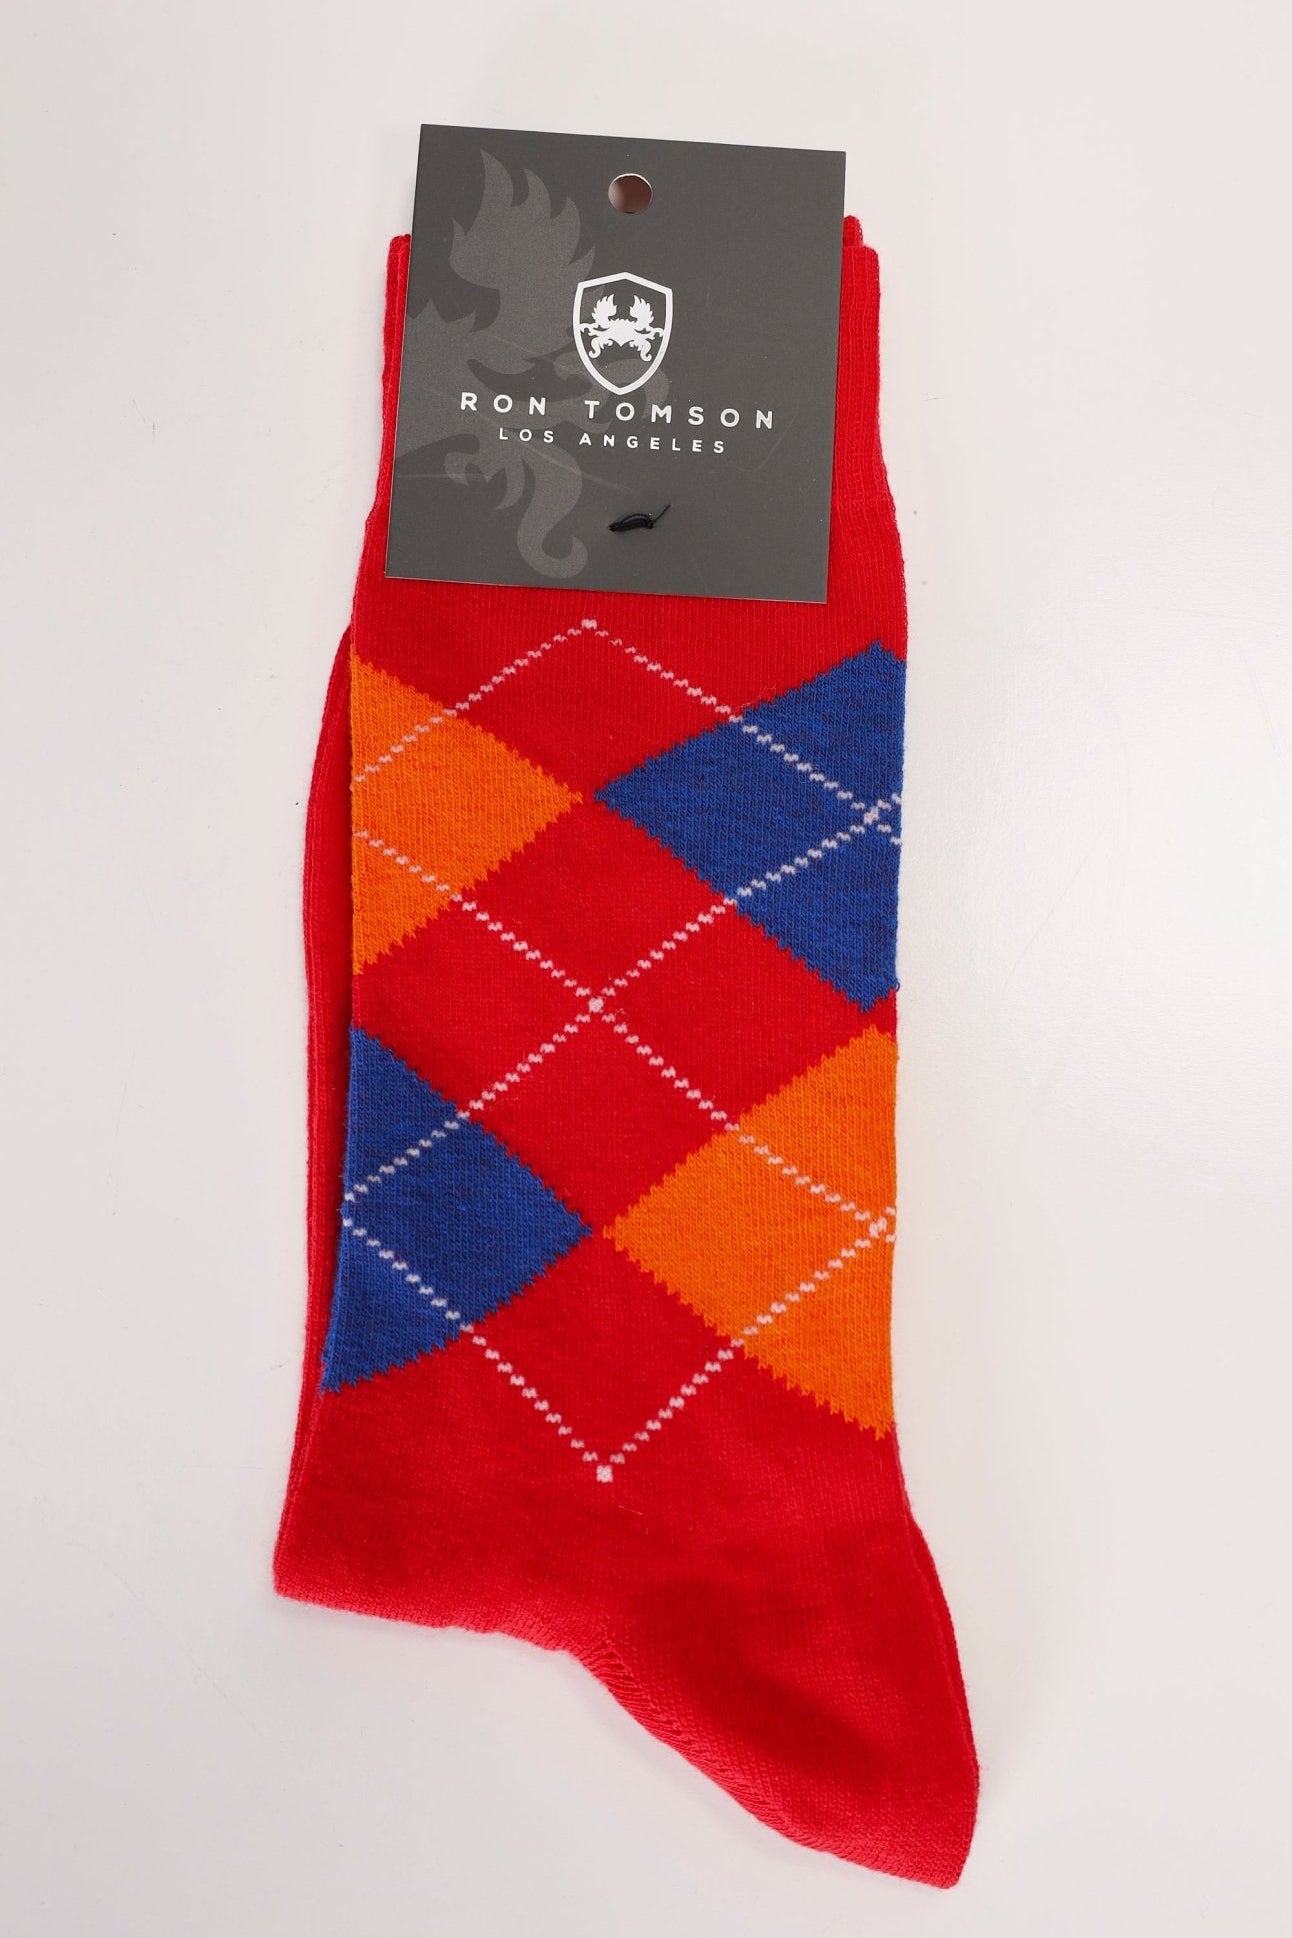 Red Patterned Sock - Ron Tomson